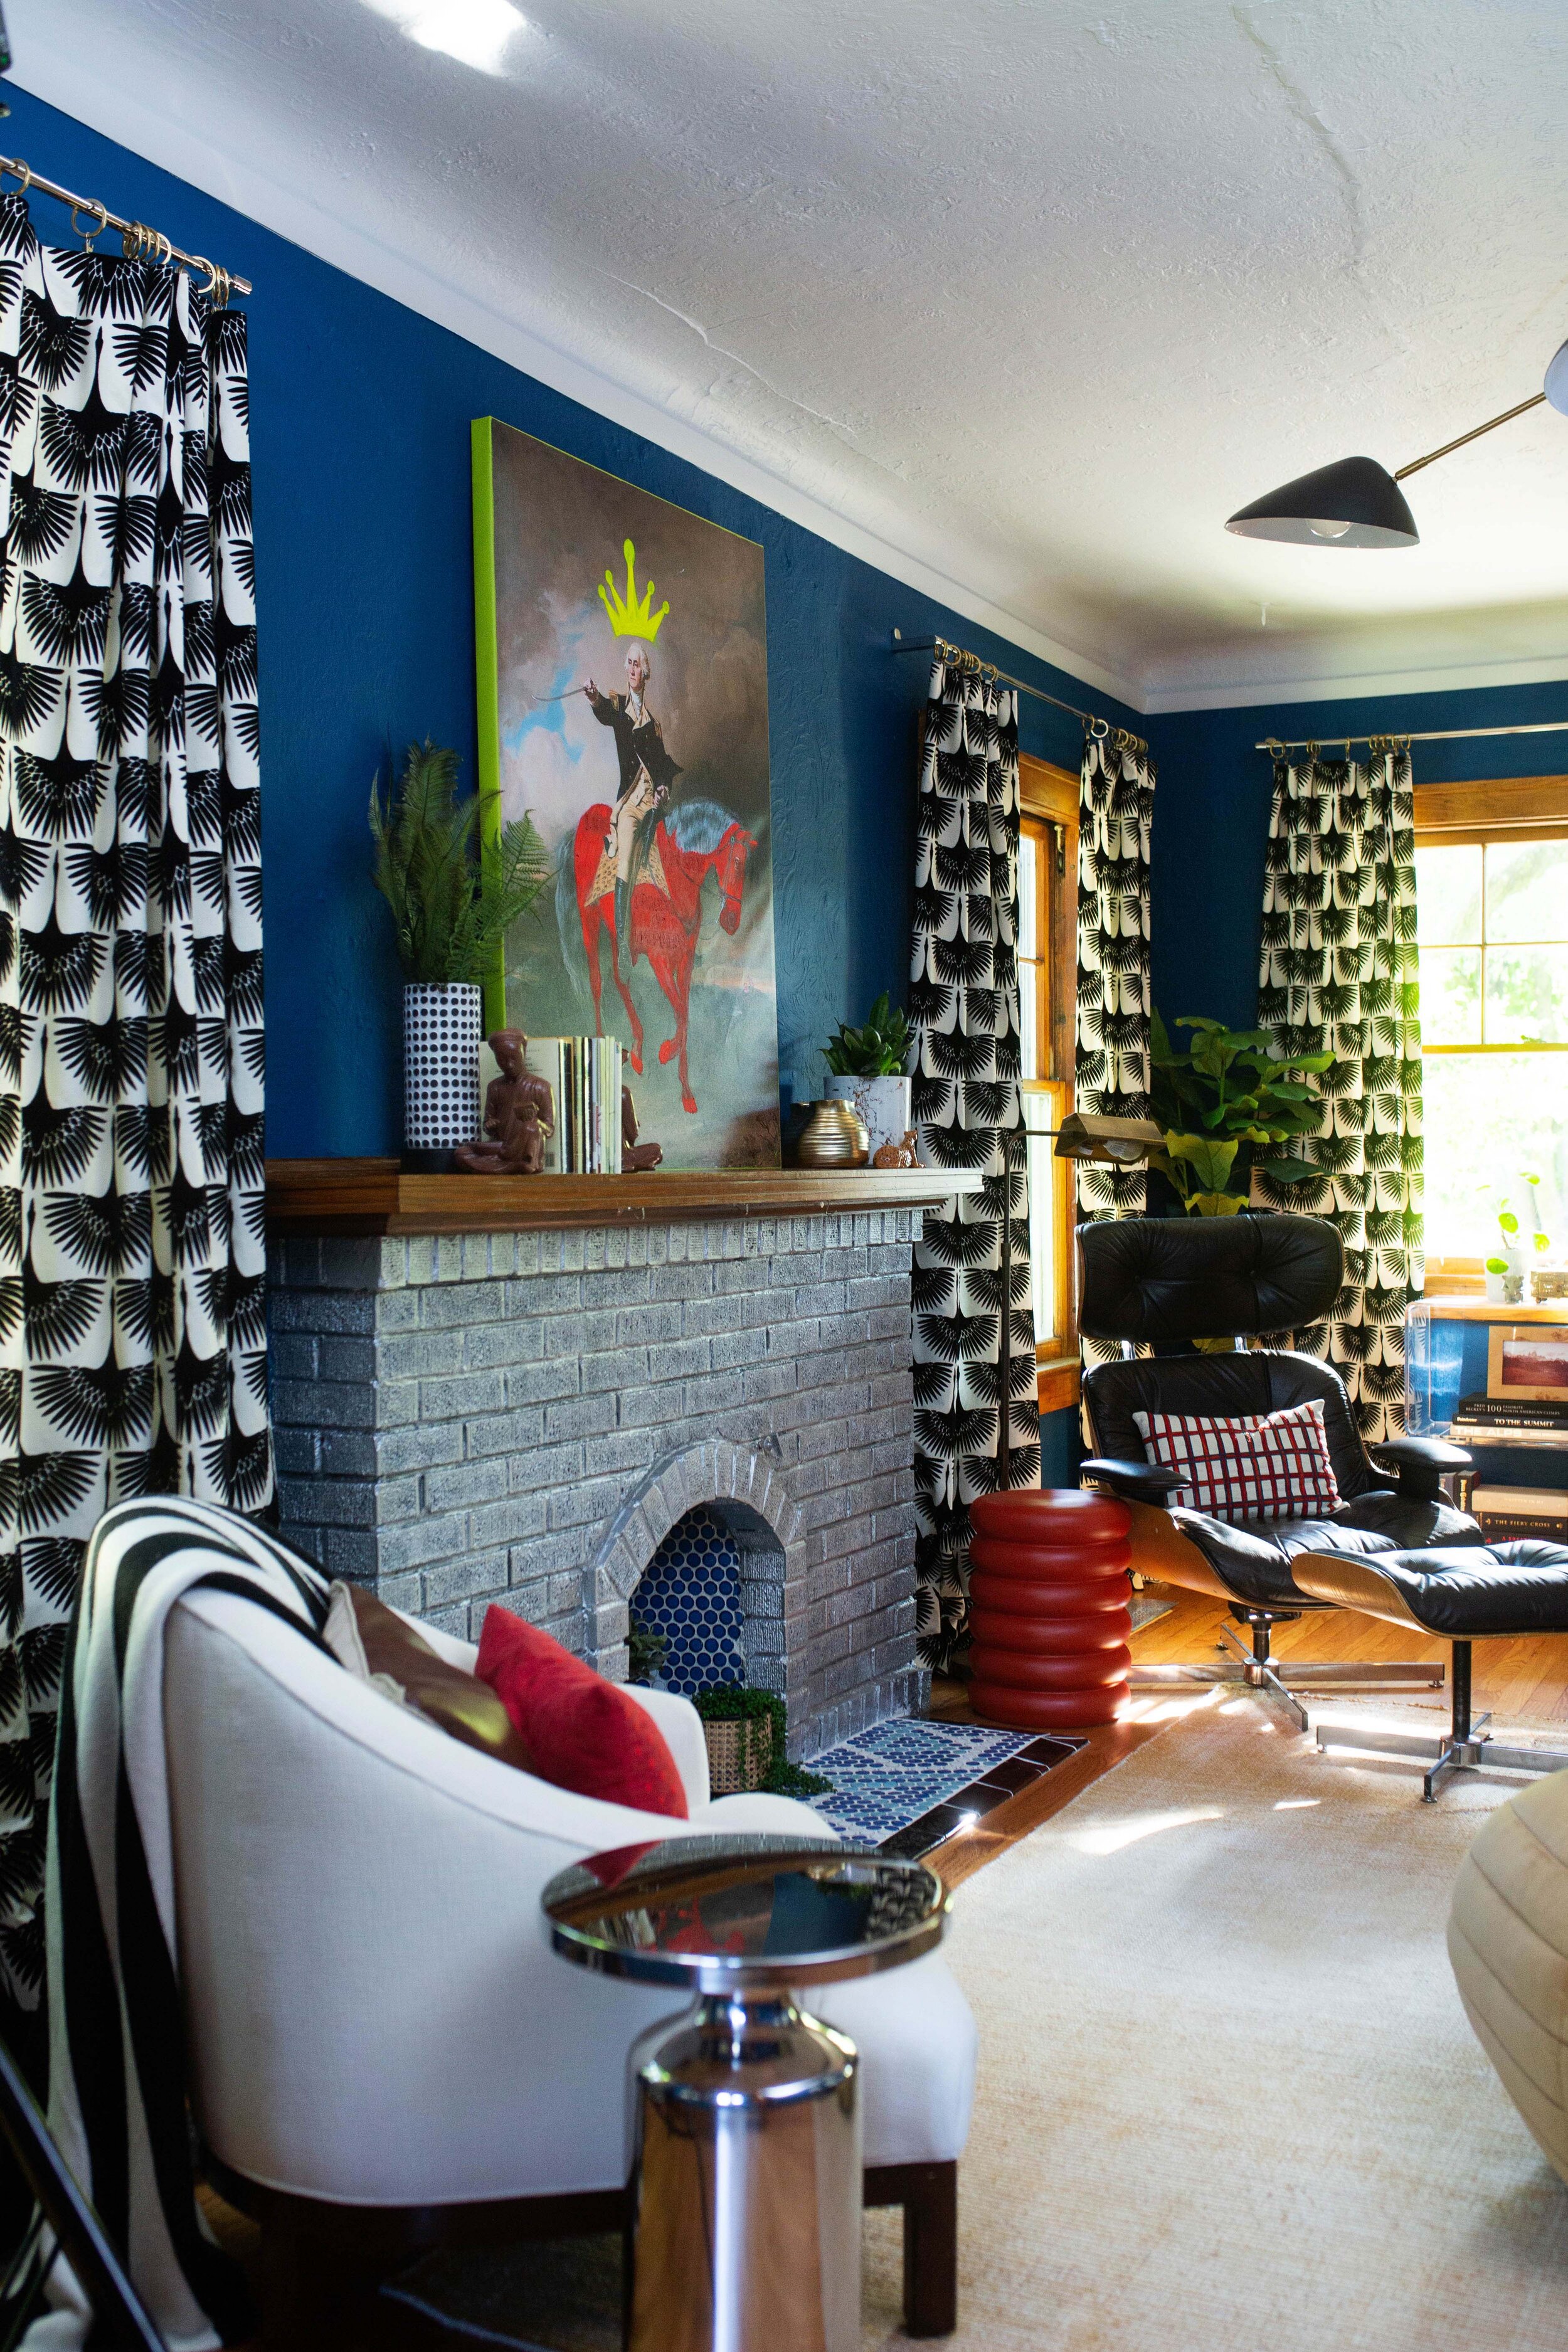 1 Blue room regatta Sherwin Williams black and white curtains silver metallic brick fireplace blue white modern penny tile design eames chair by fireplace.jpg